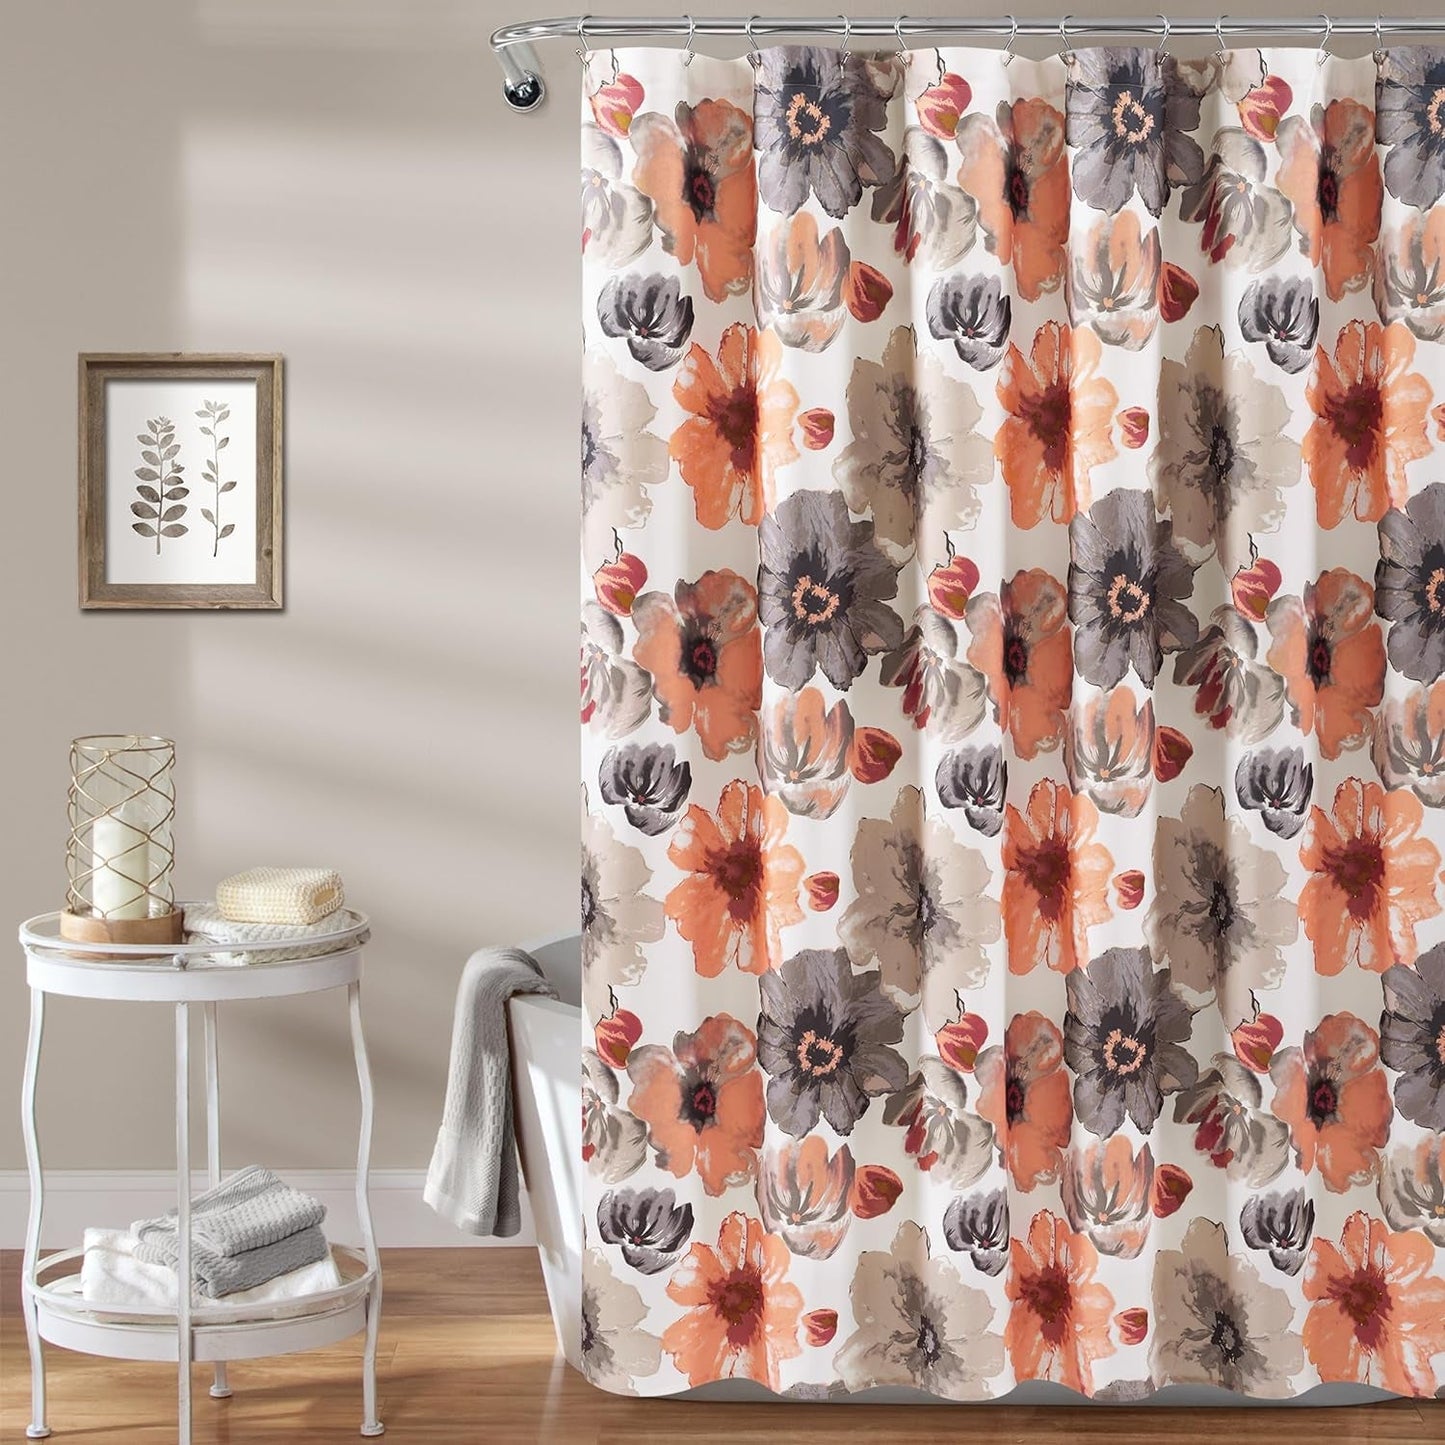 Lush Decor Leah Floral Shower Curtain, 72" W X 72" L, Yellow & Gray - Pretty Yellow Shower Curtain - Spring Decor - Colorful Blooming Flowers - Country Cottage & Farmhouse Bathroom Decor